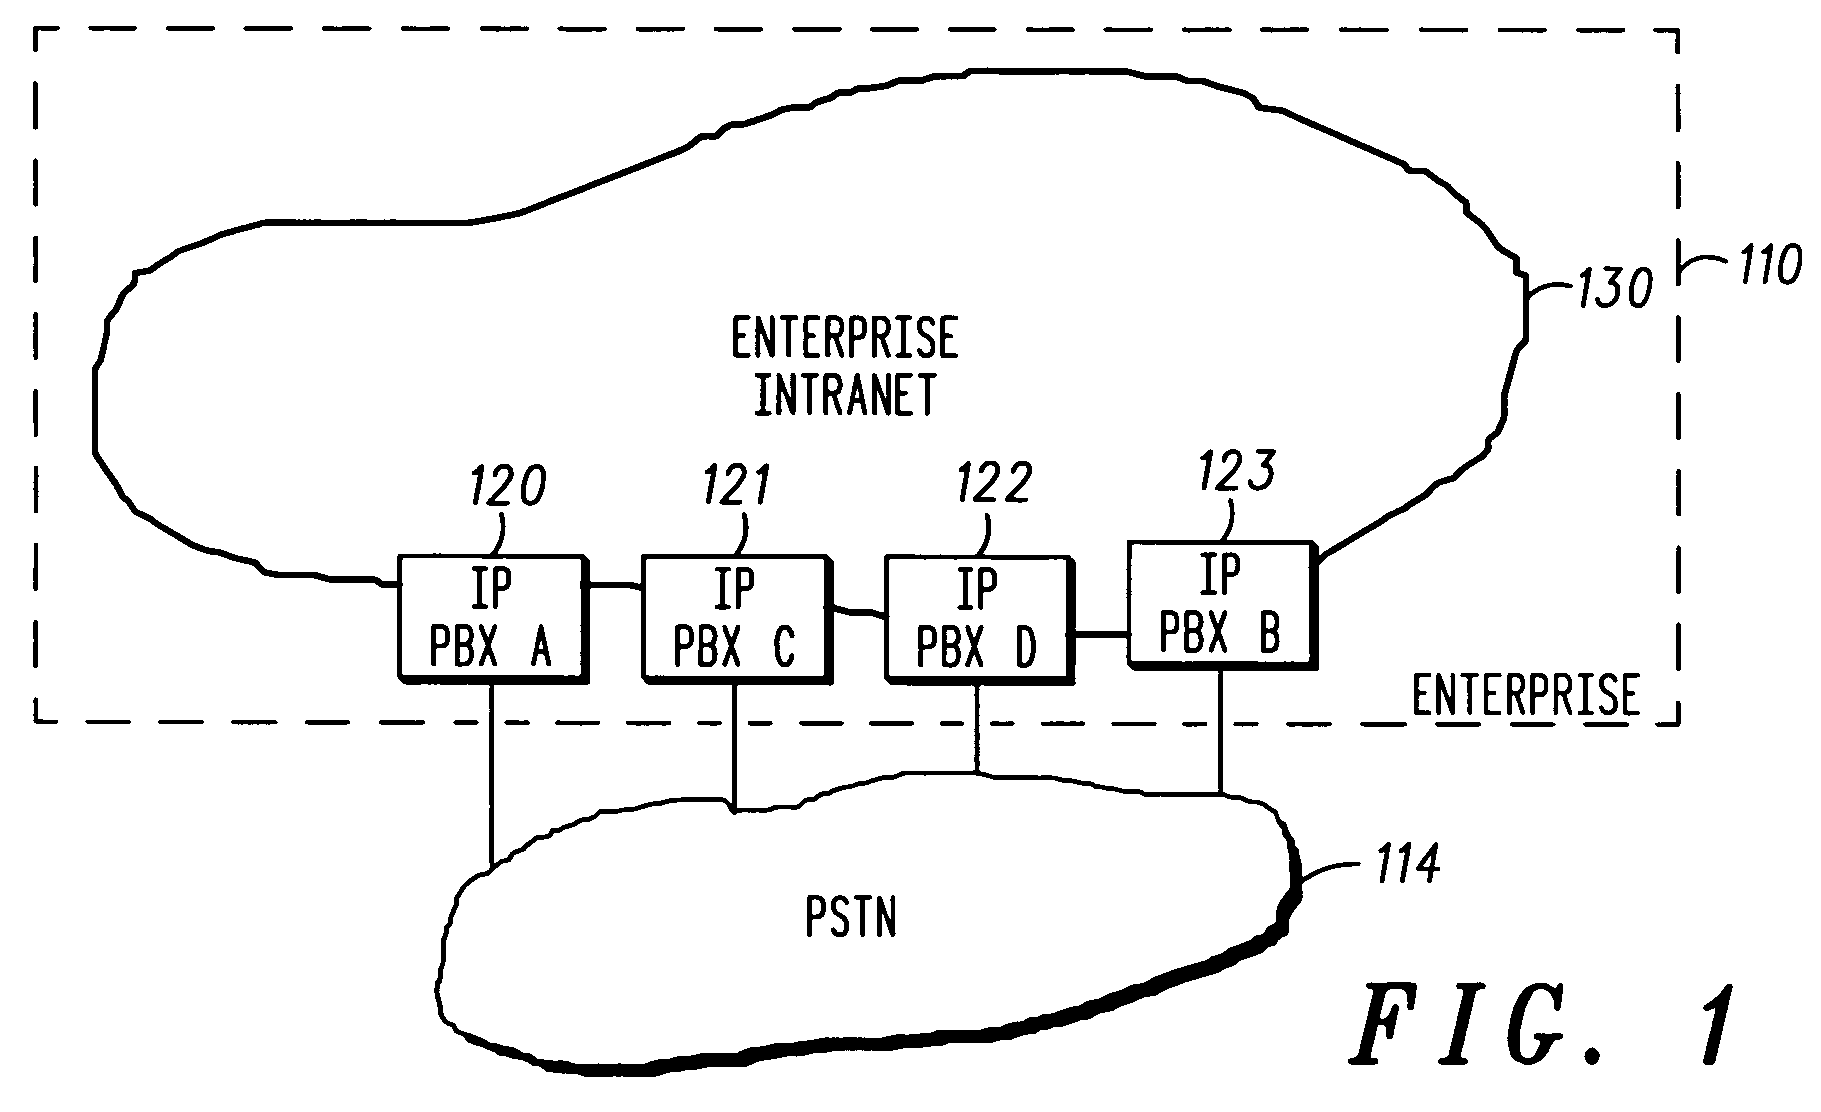 Inter-site call routing and roaming support